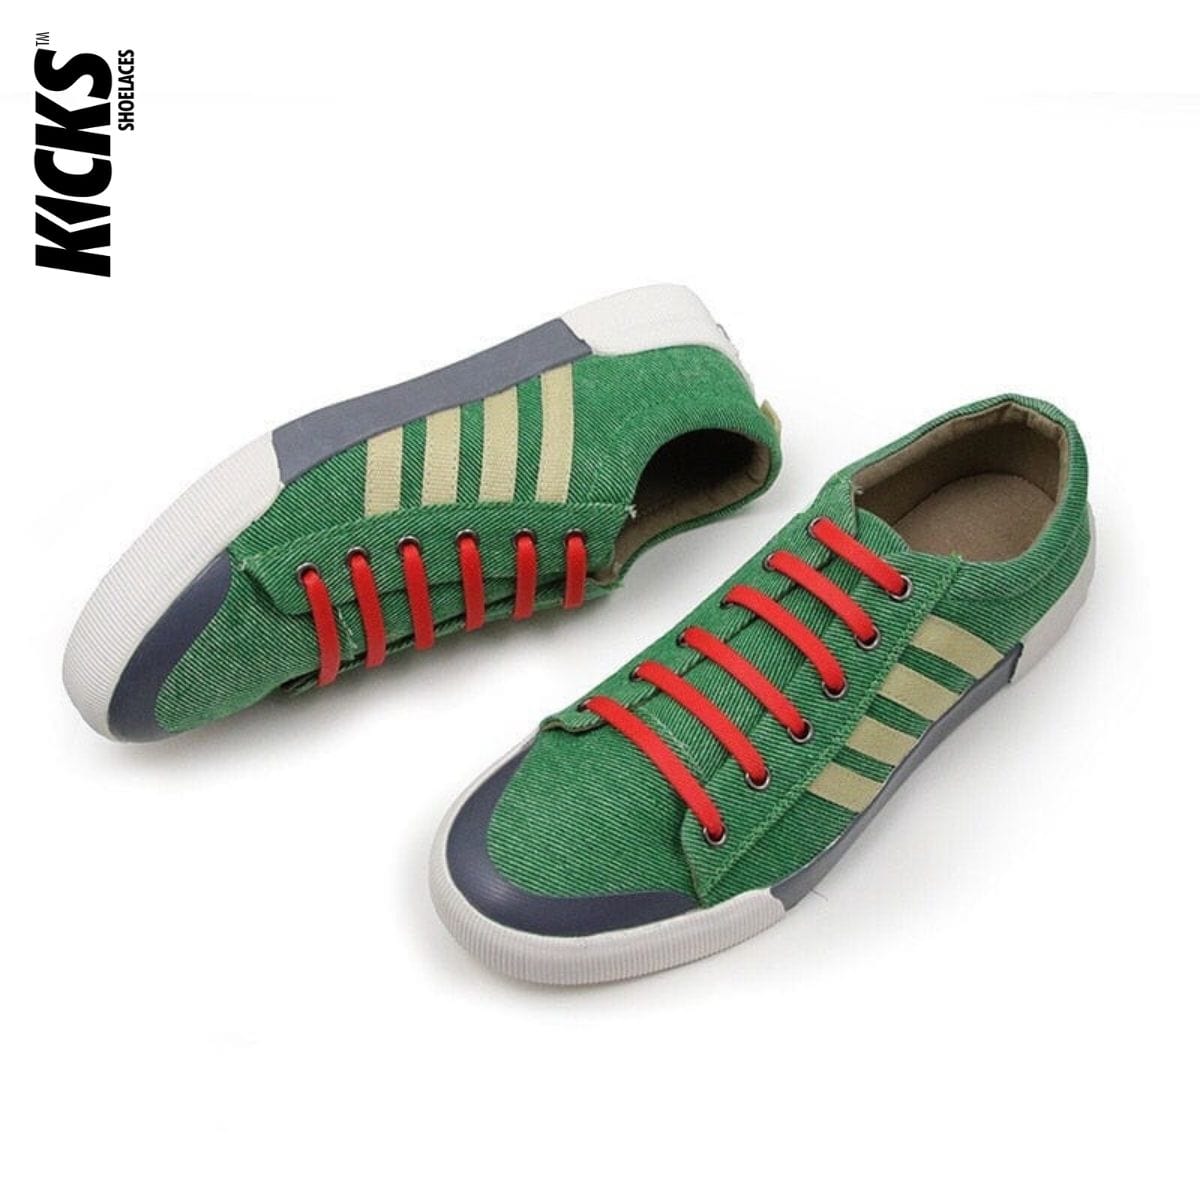 rubber-no-tie-shoelace-replacements-for-casual-shoes-and-pumps-green